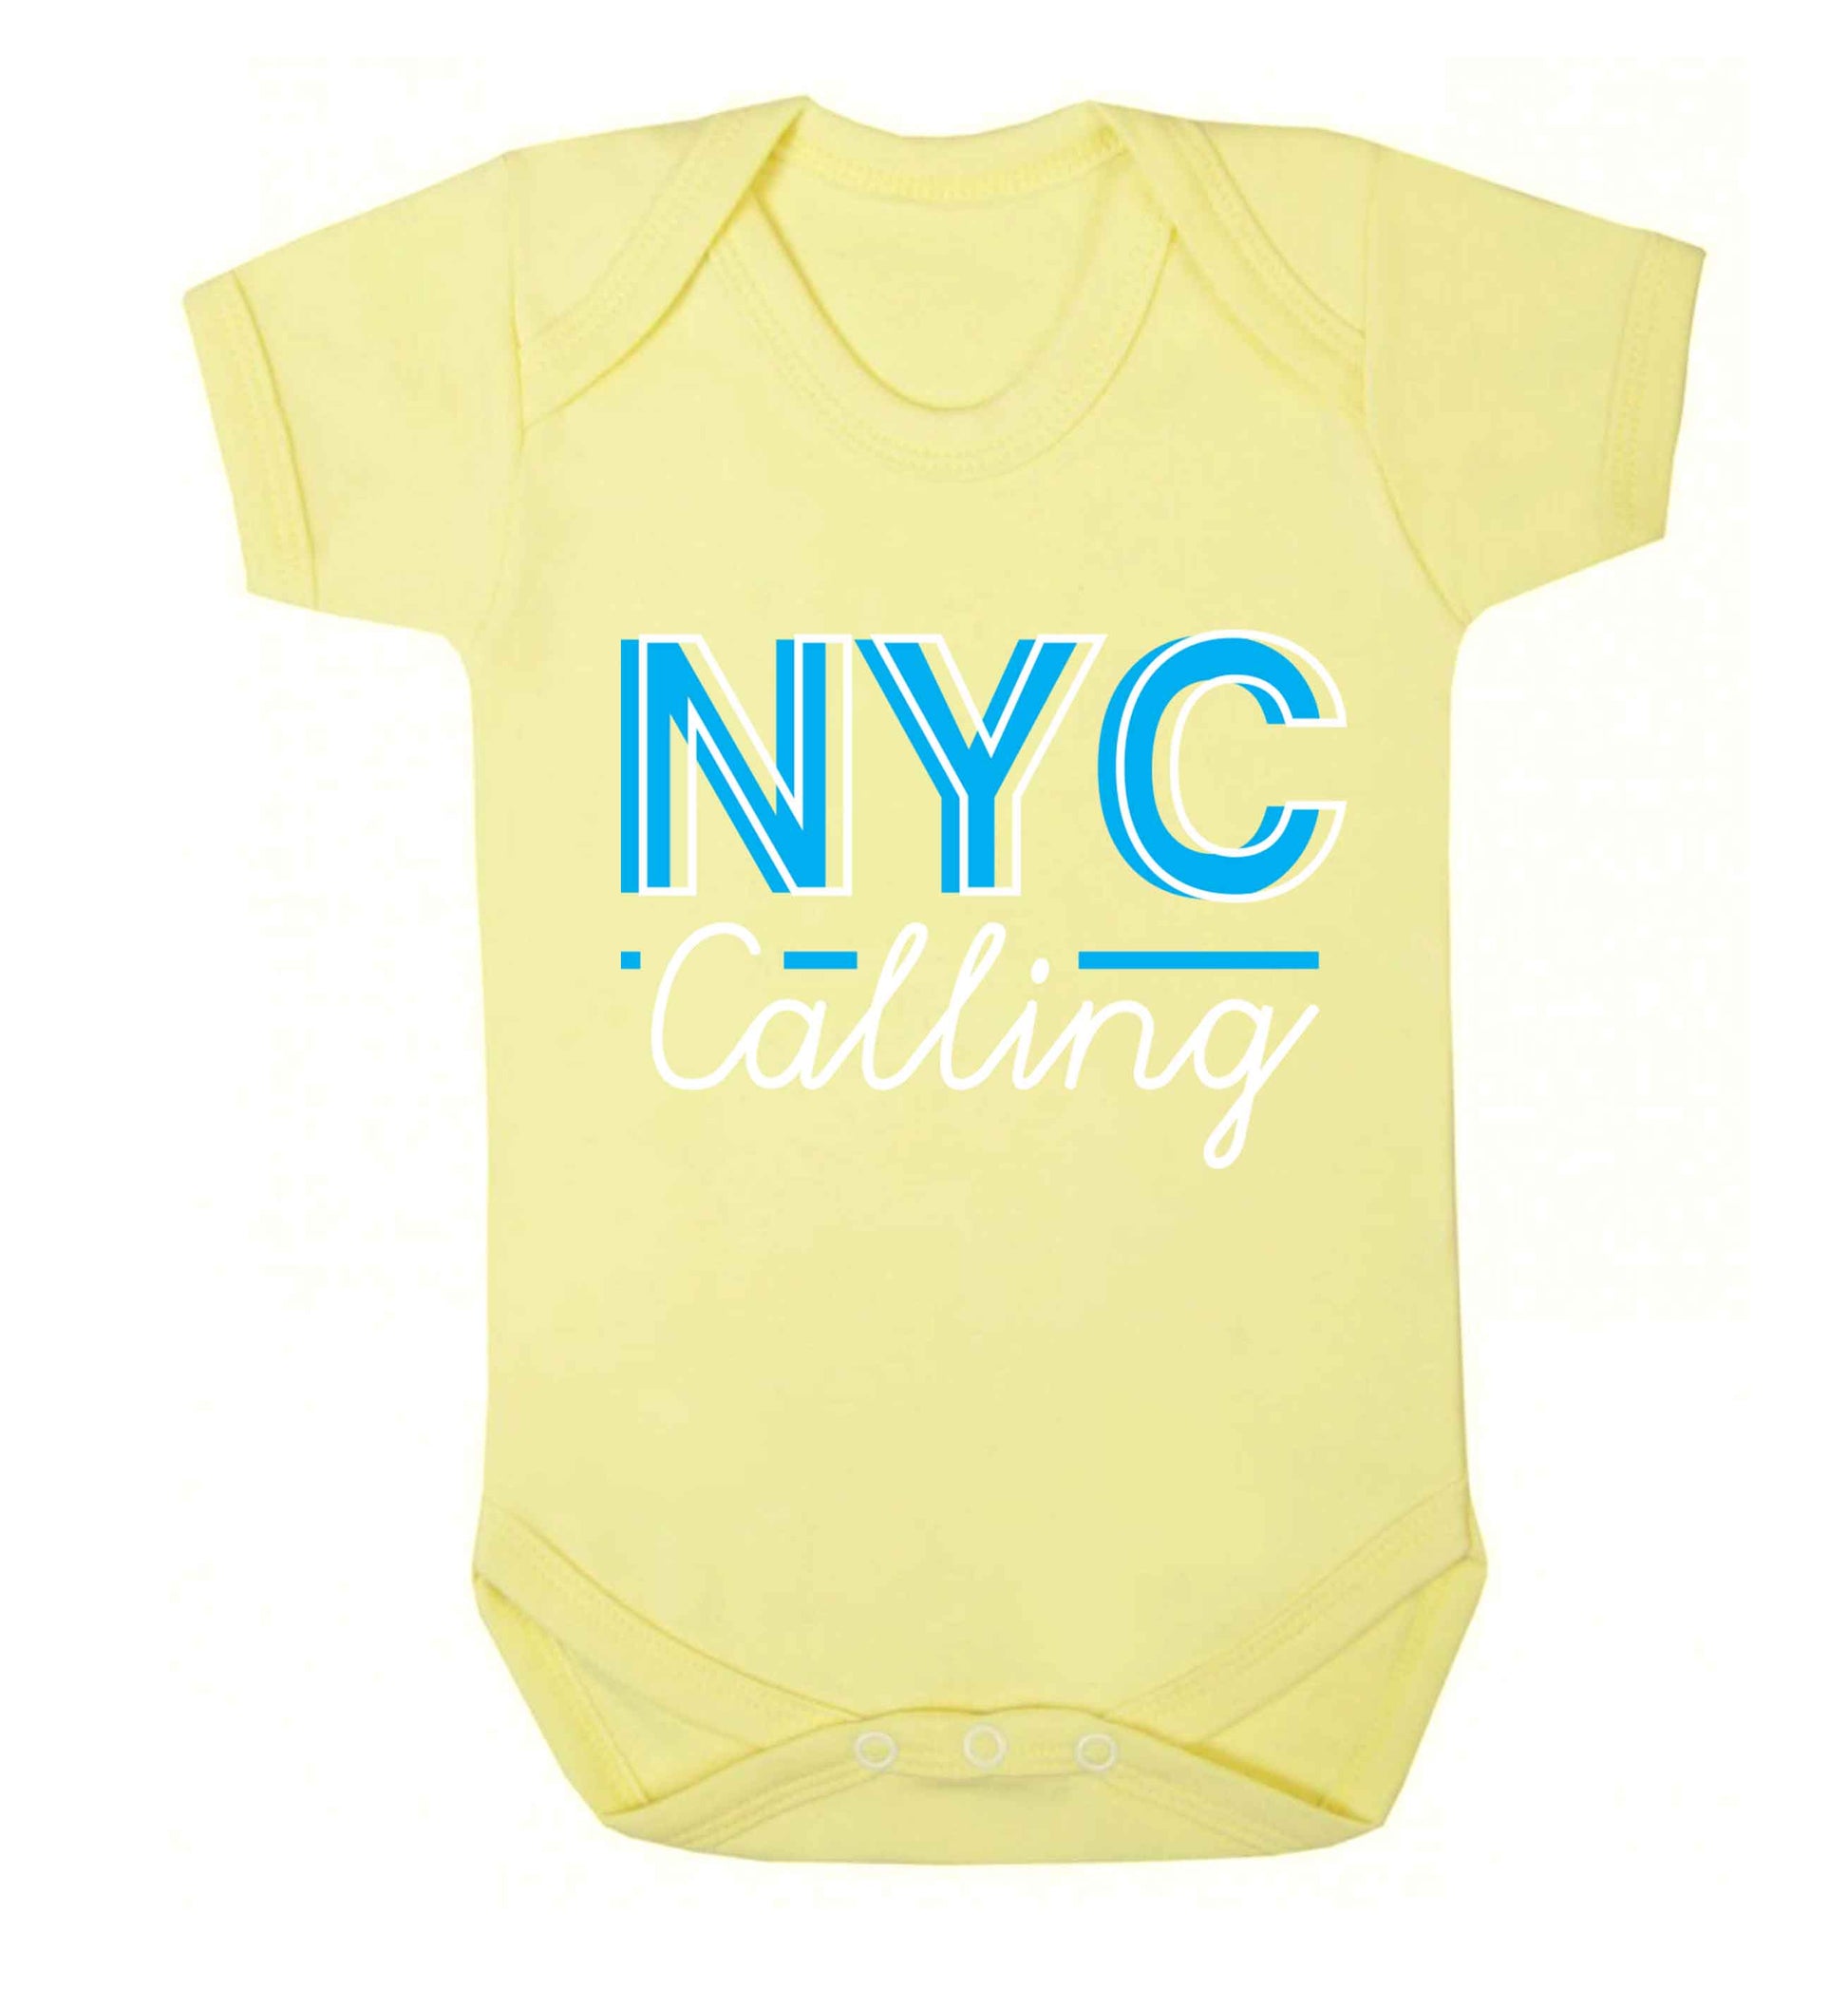 NYC calling Baby Vest pale yellow 18-24 months